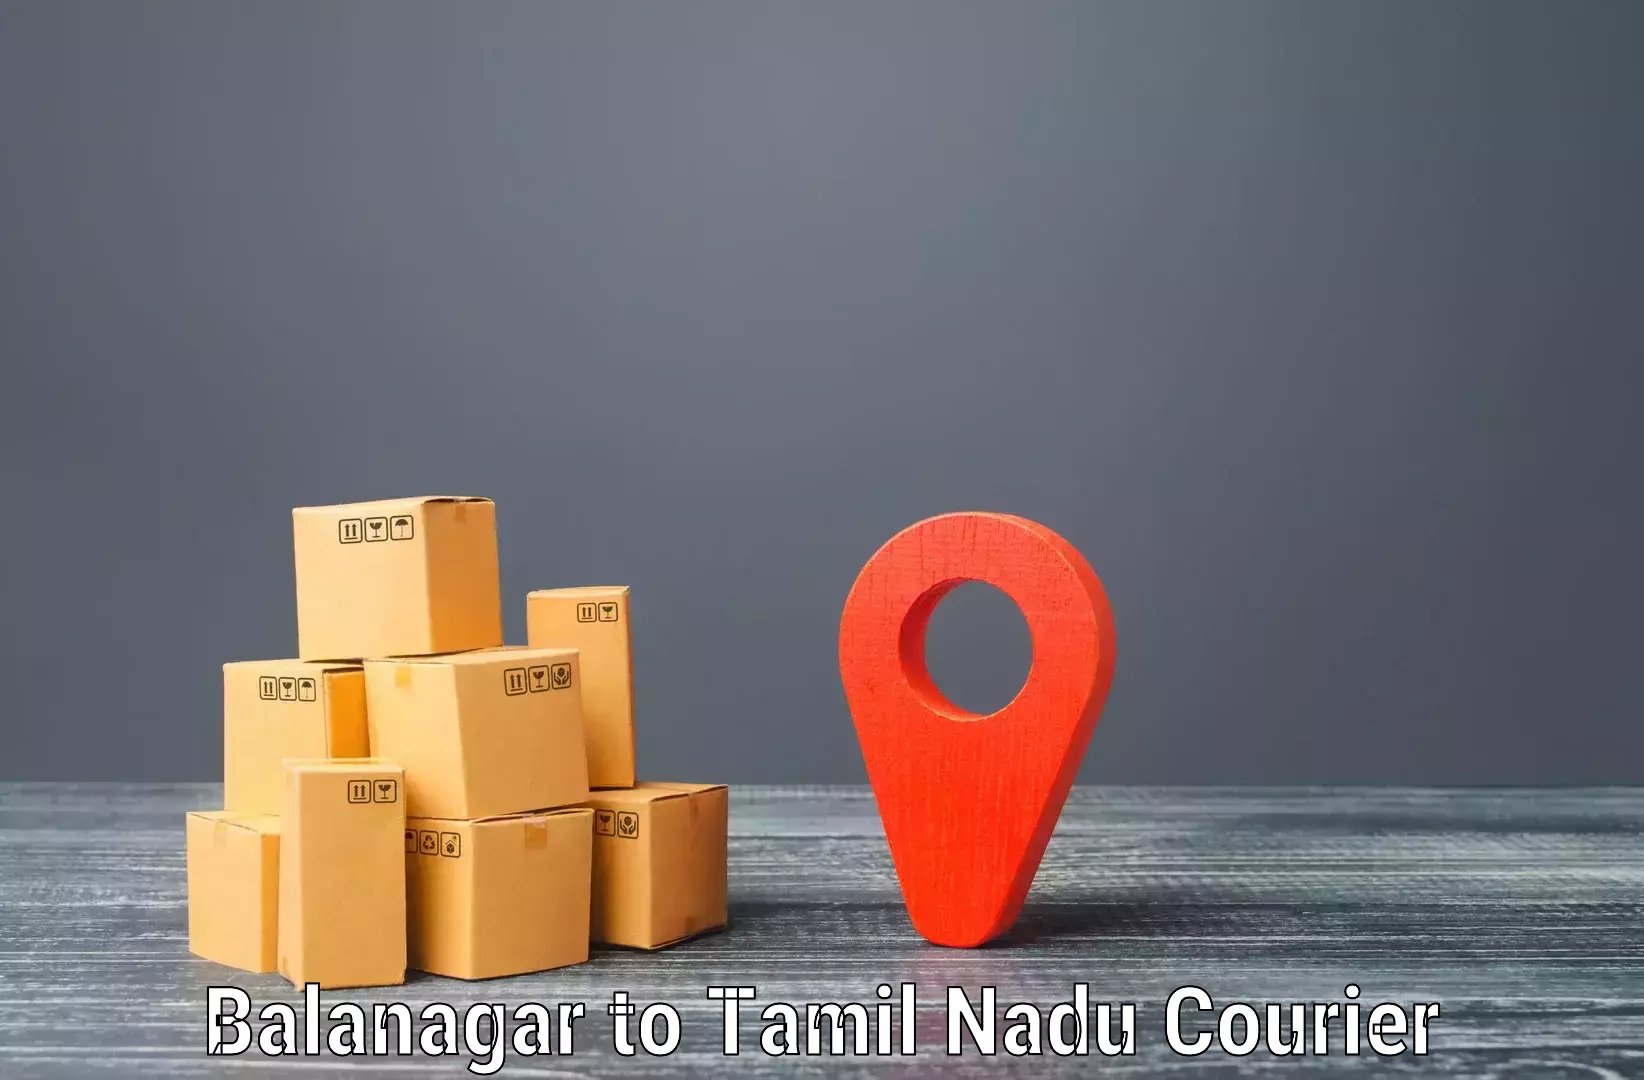 Tailored freight services Balanagar to Shanmugha Arts Science Technology and Research Academy Thanjavur